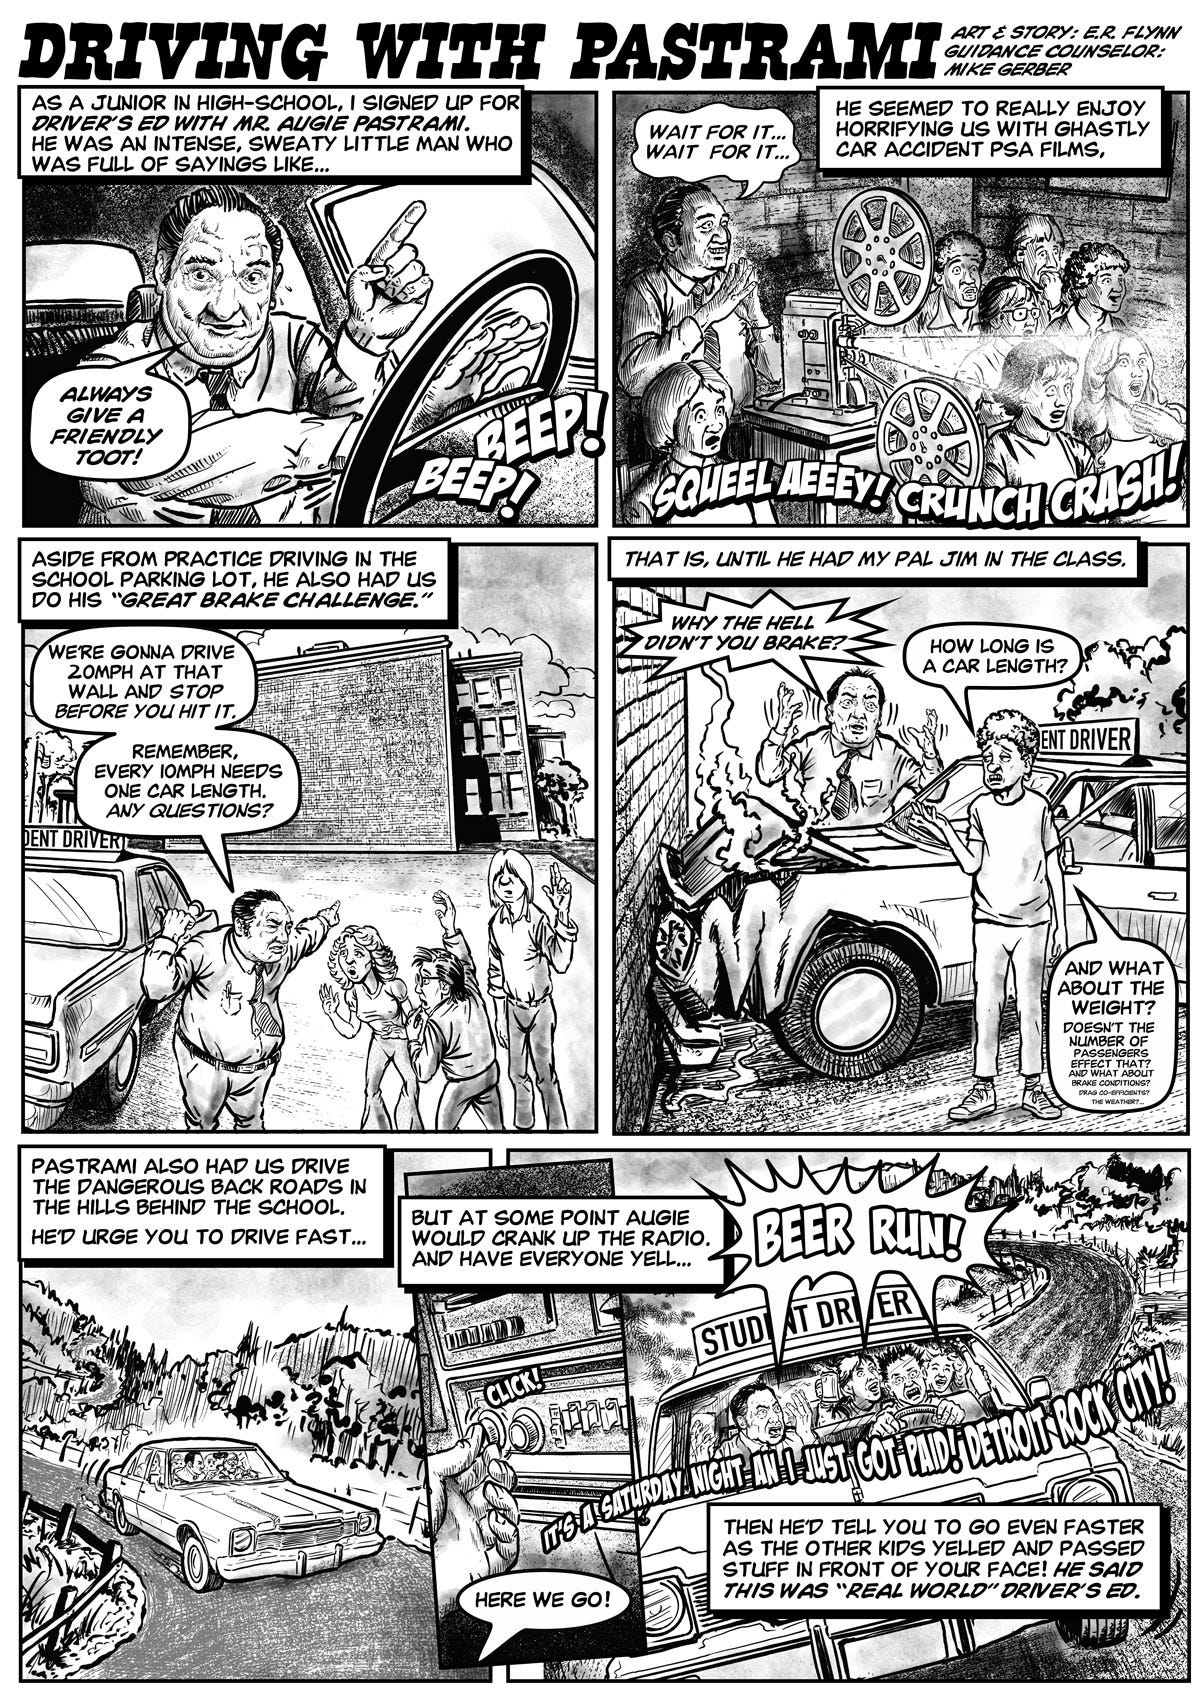 Driving with Pastrami page 1 Comic by ER Flynn